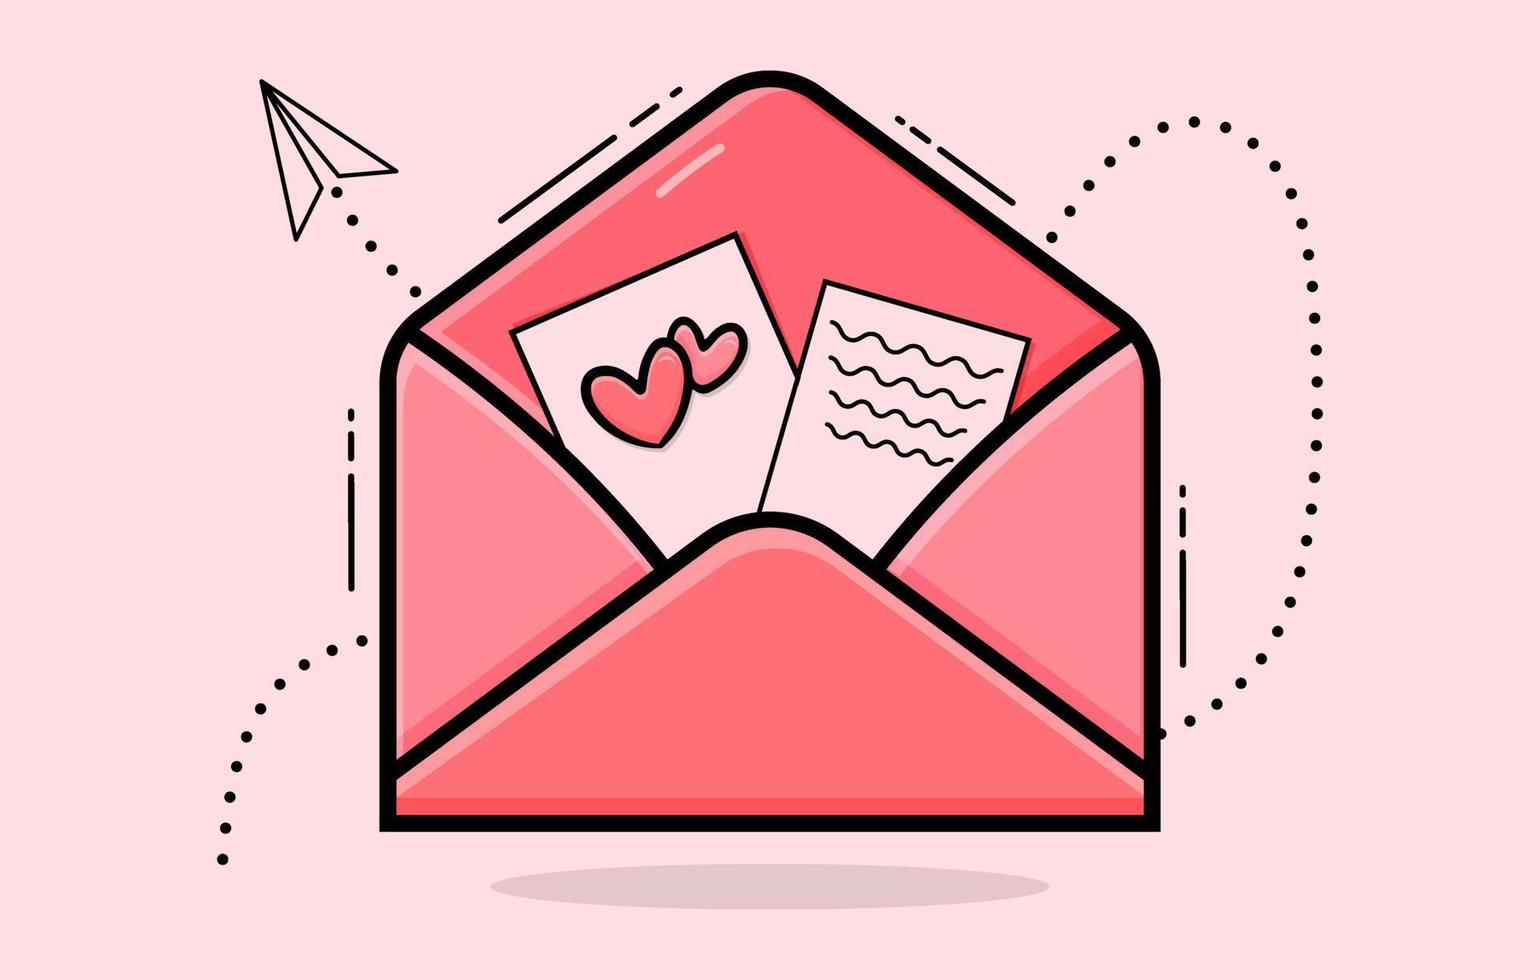 Envelopes with hearts illustration free, Envelope with papers and a heart vector, love letter illustration,  heart in an envelope vector